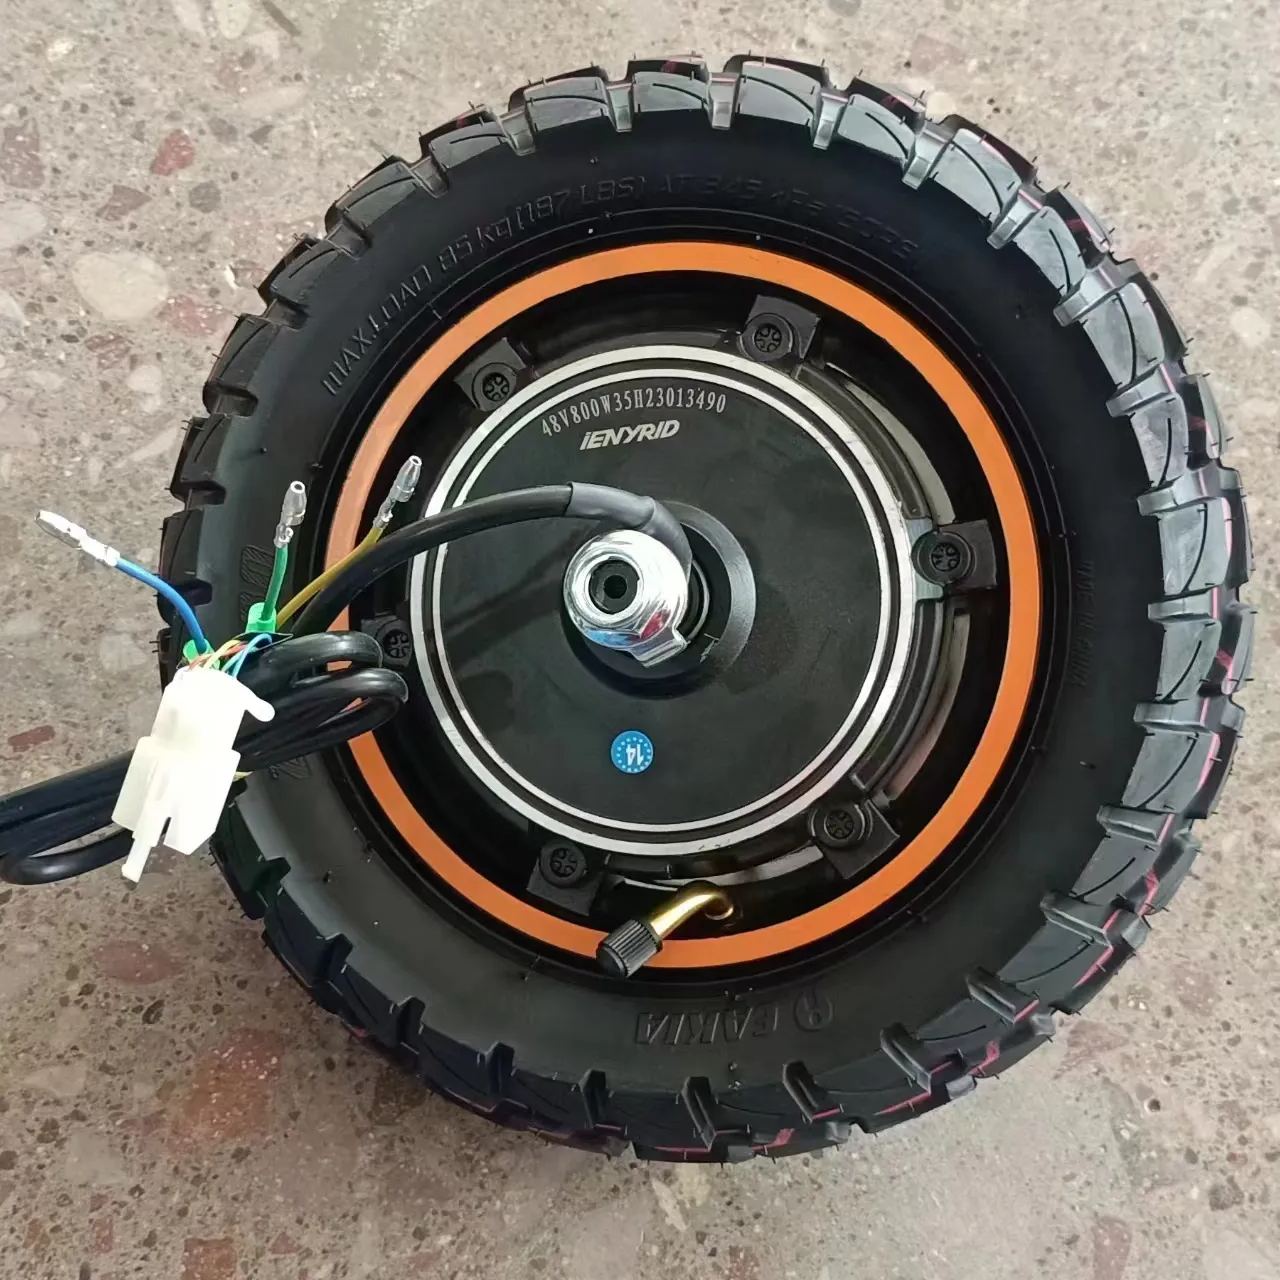  ienyrid scooter m4 pro s motor with specs of 500W, 48V, 10AH for a 10" wheel with tire